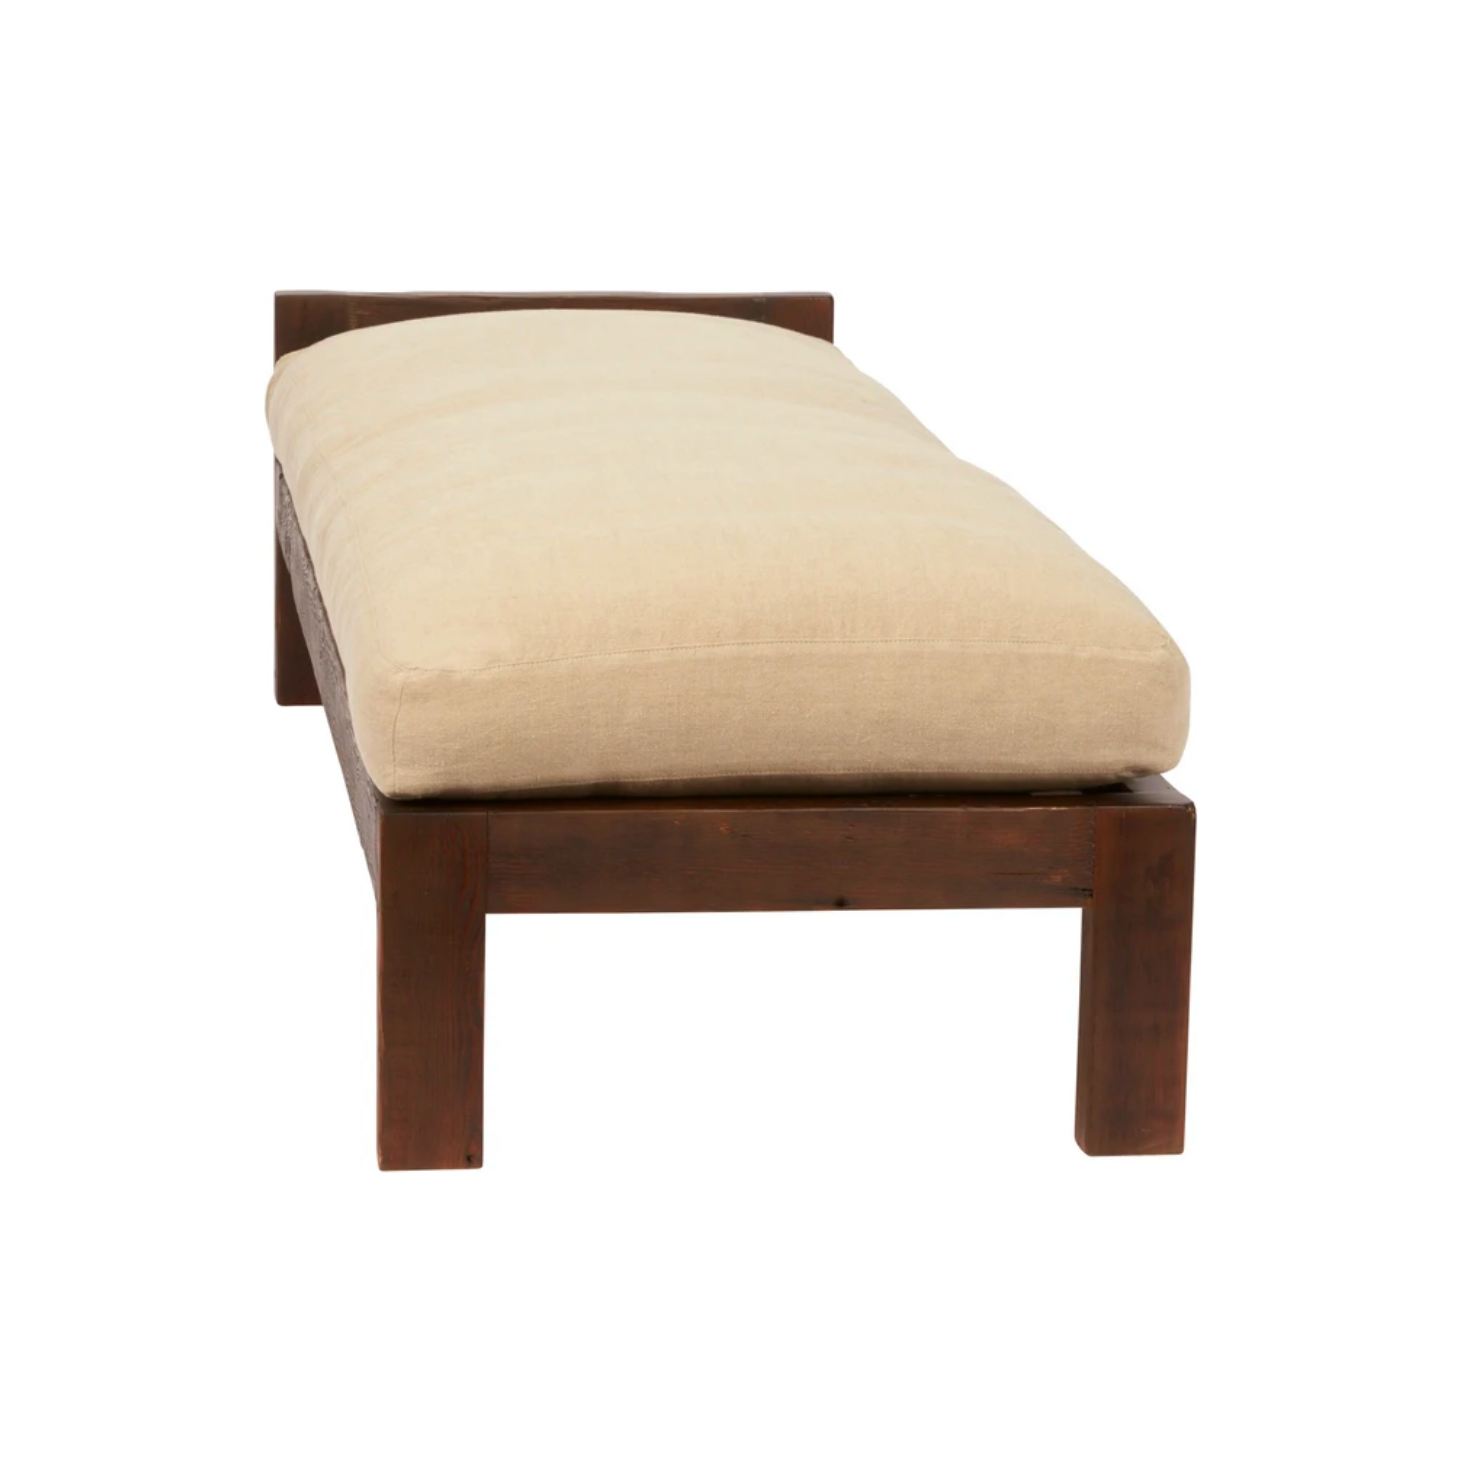 A beautifully crafted modern piece, the Corpus Daybed from Cisco Brothers is sure to bring comfort and style to any space.  Overall size: 78"w x 27"d x 18"h  Sitting Space: 76"w x 27"d  Seat Height: 18"h  Priced and photographed in a grade H fabric Brevard Burlap.